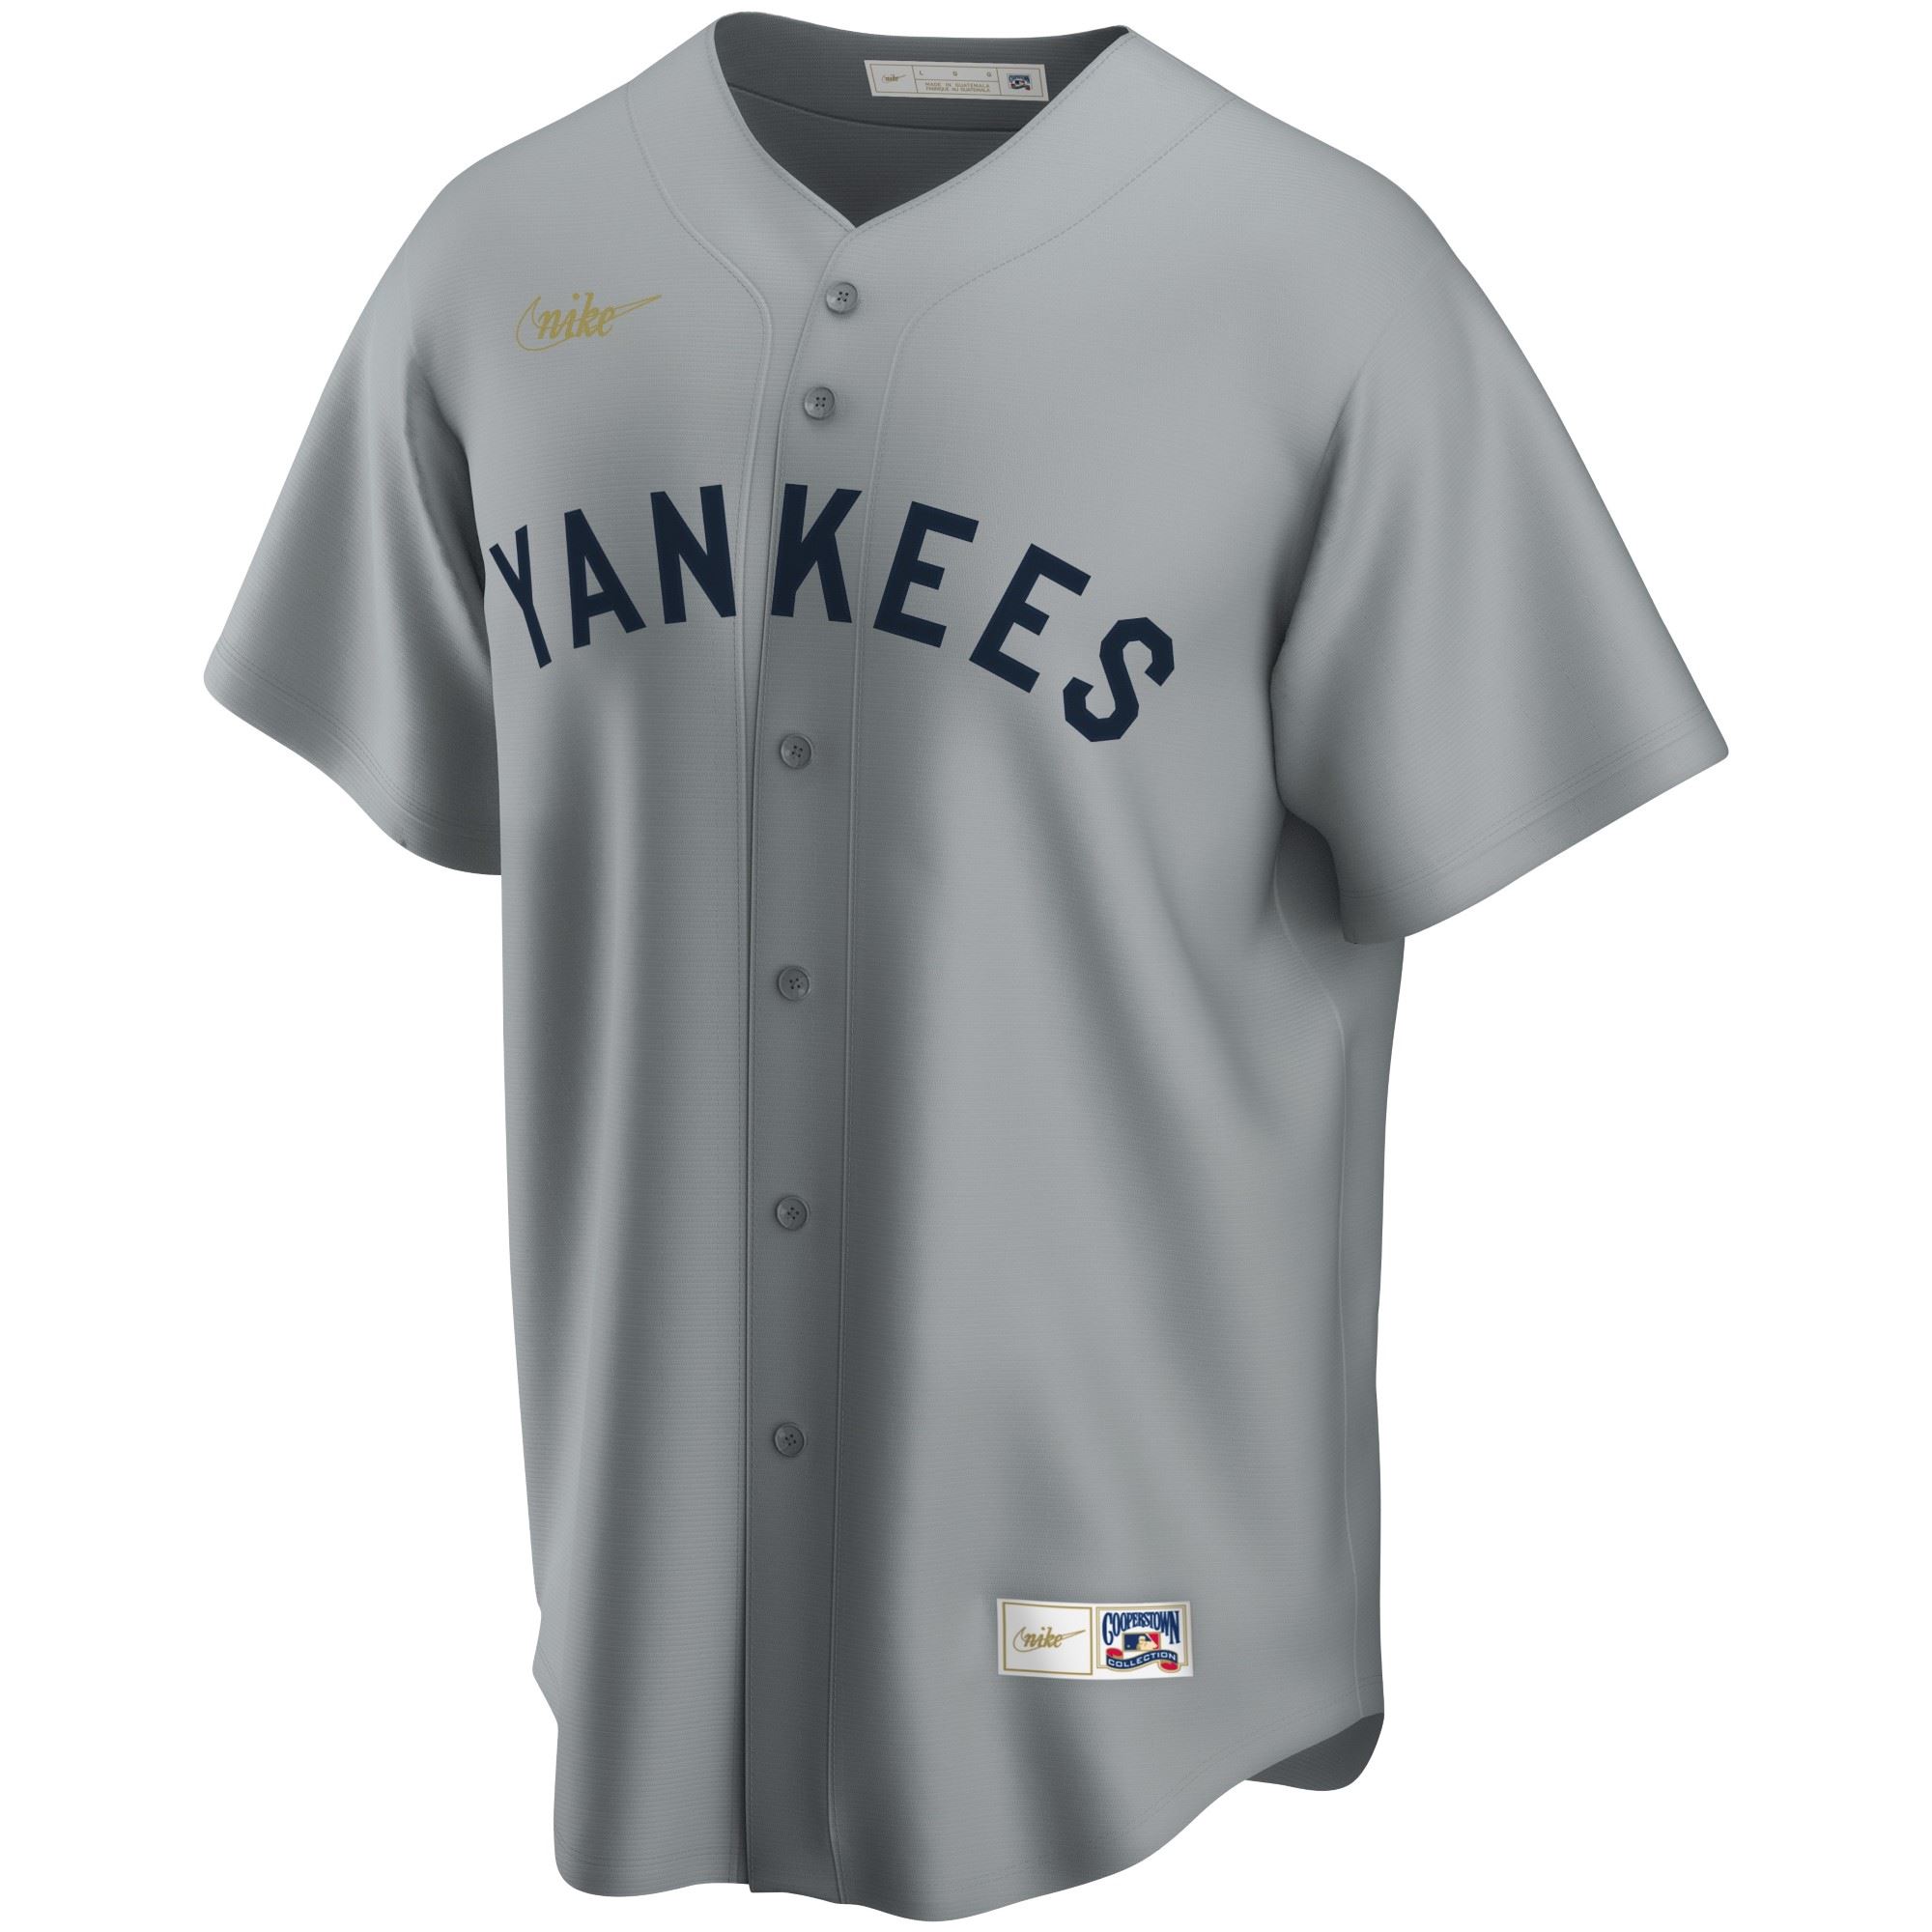 New York Yankees Official MLB Cooperstown Jersey Grey Nike